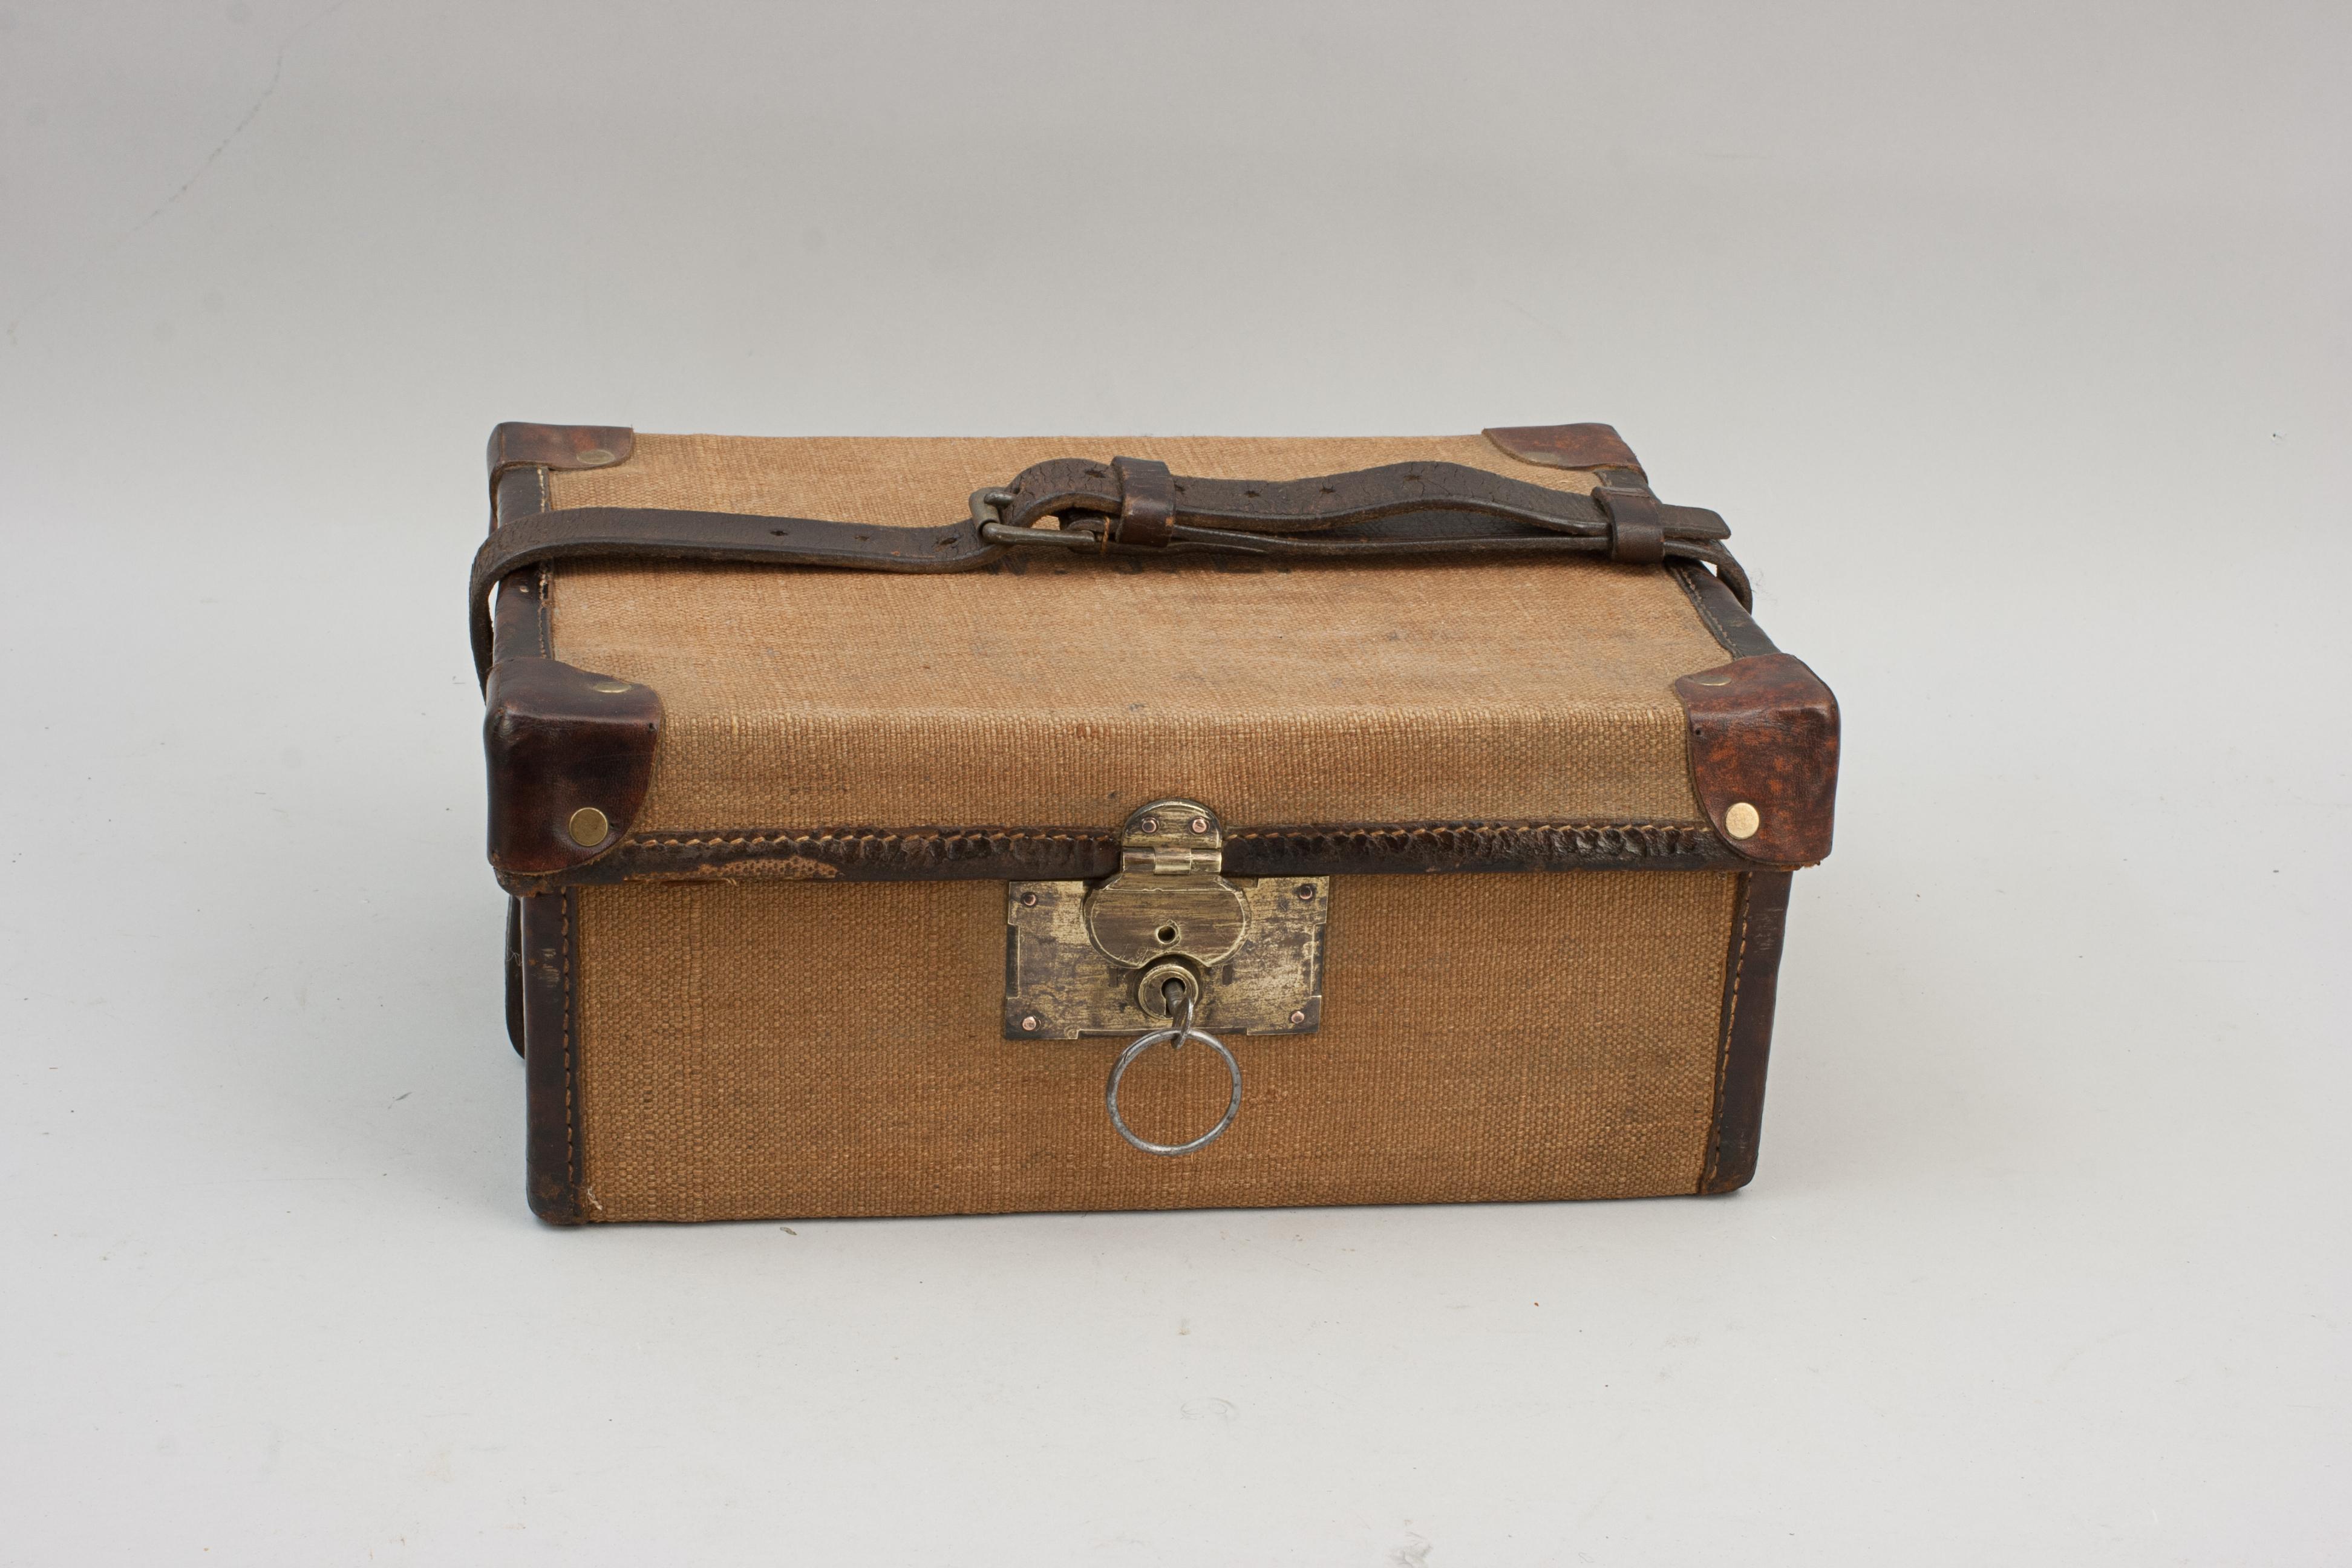 Vintage small cartridge magazine case.
A fine compact shooting cartridge magazine case. The high quality cartridge case with wooden carcass covered in canvas and leather trim, it has a working brass lock and key. The magazine case is in good